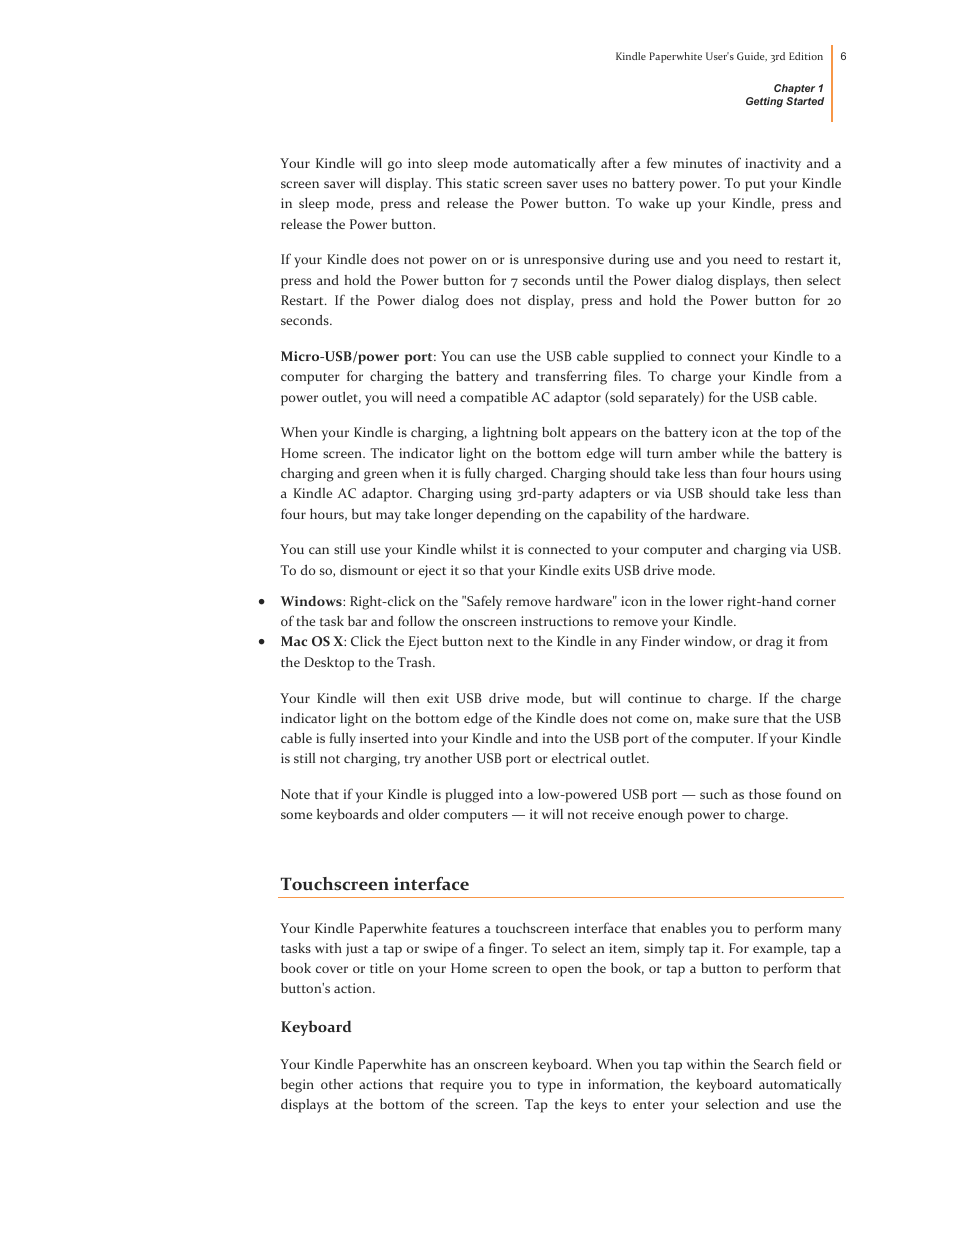 Touchscreen interface, Keyboard | Kindle Paperwhite (2nd Generation) User Manual | Page 6 / 47